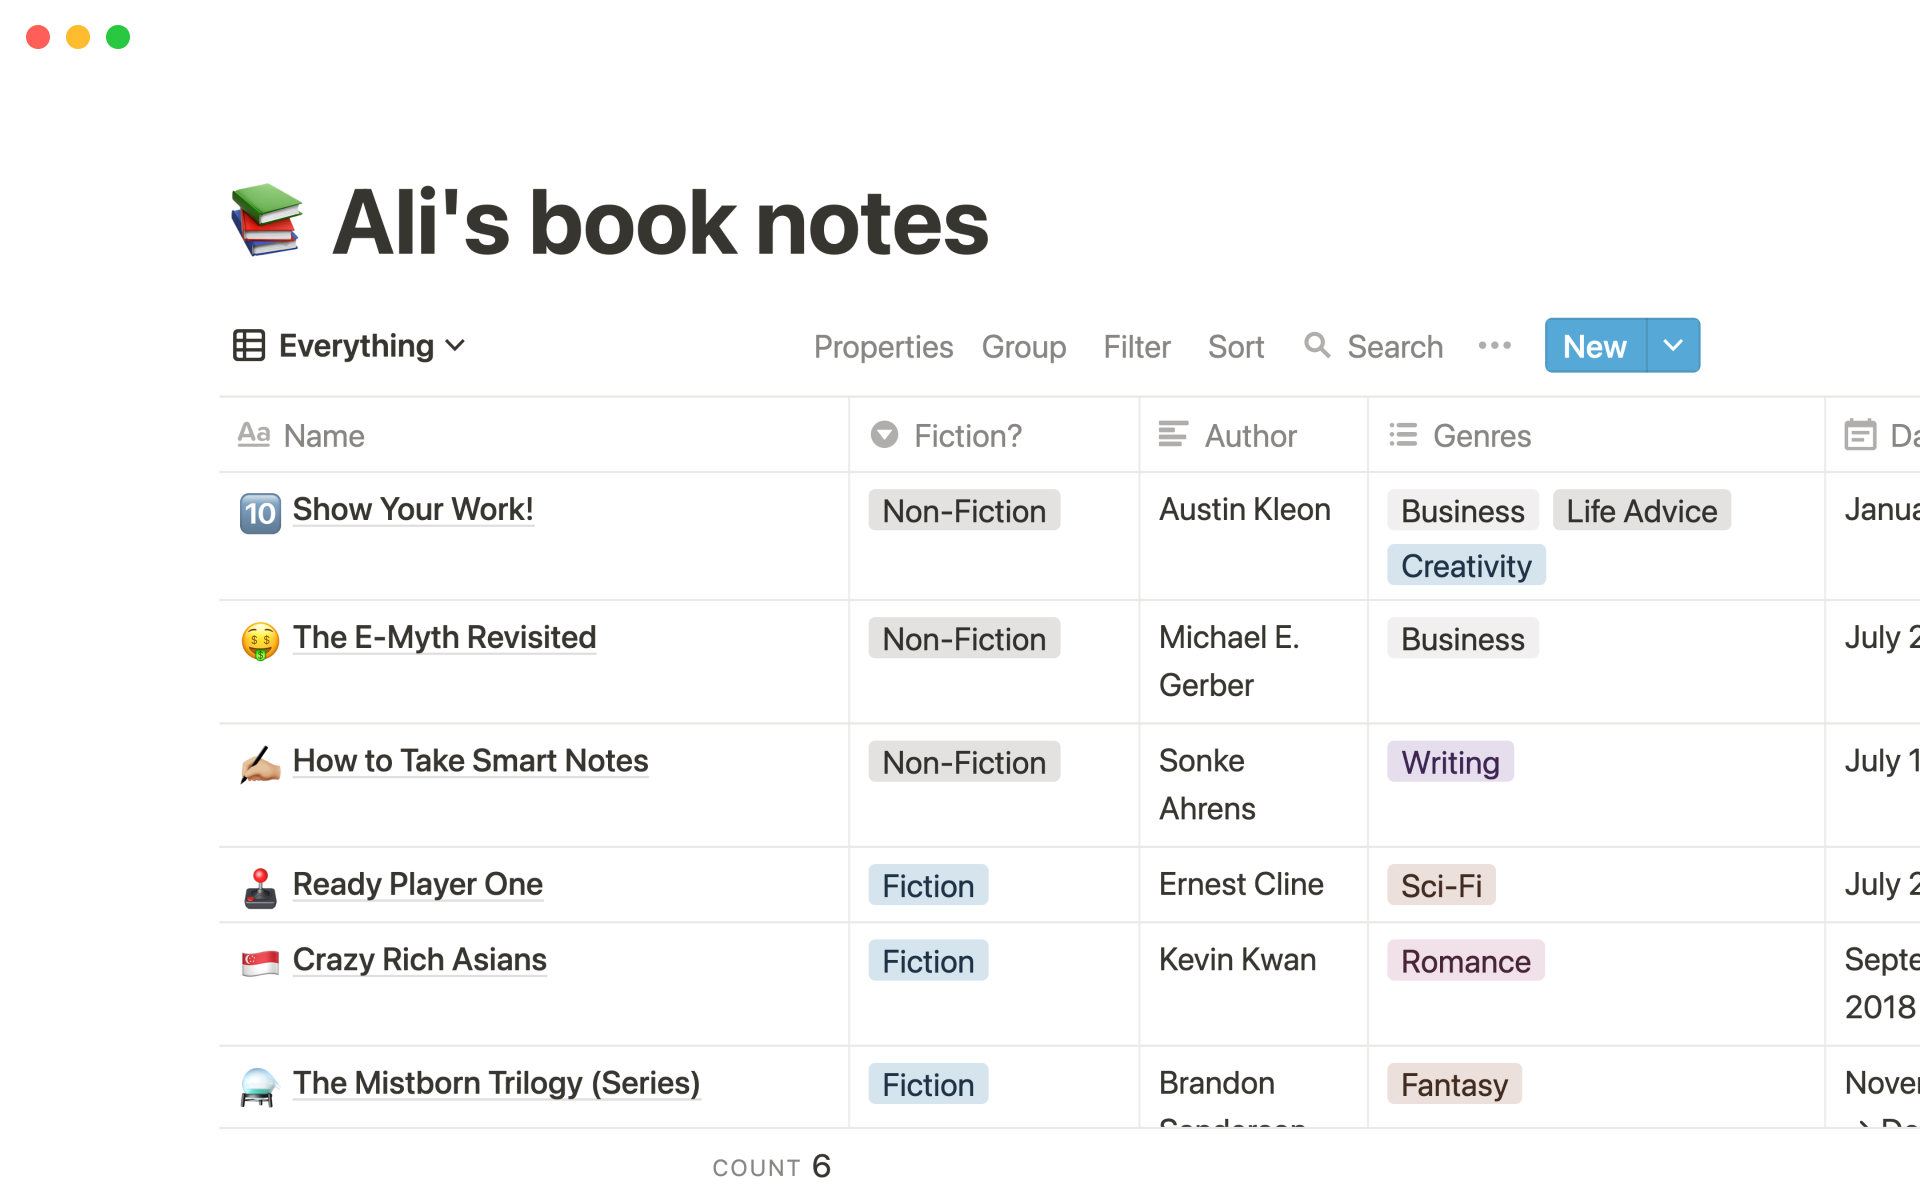 The desktop image for the Ali's book notes template